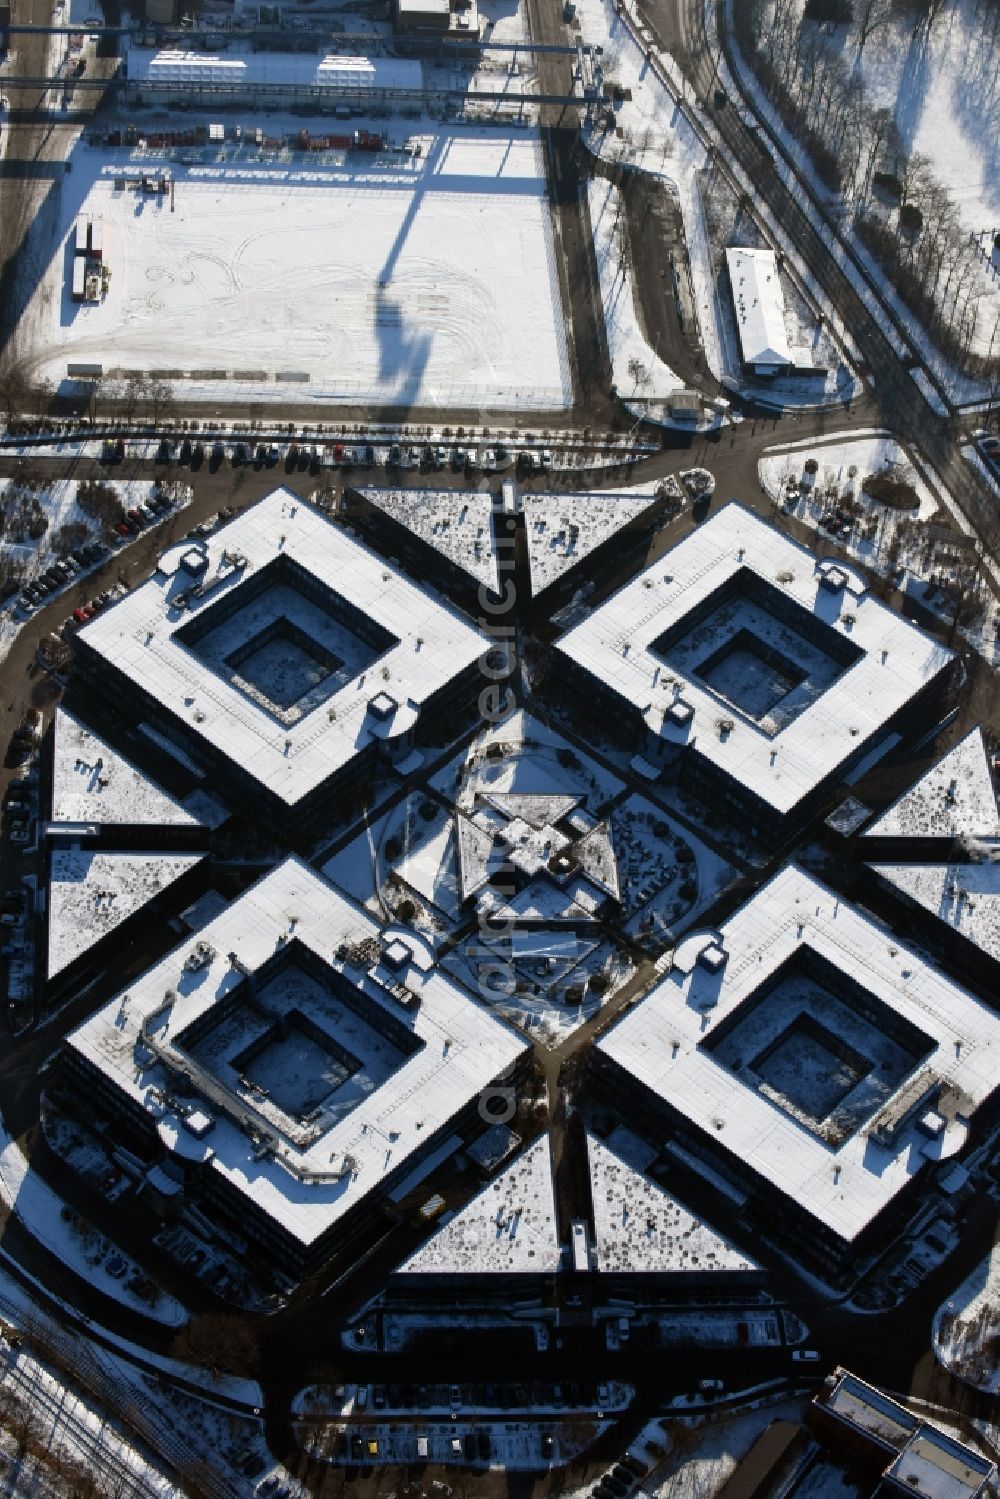 Hennigsdorf from above - Wintry snowy grounds of the Blue Wonder Technology Center in Hennigsdorf in Brandenburg. The technology park Hennigsdorf North offers a business park land for commercial, industrial, service and production